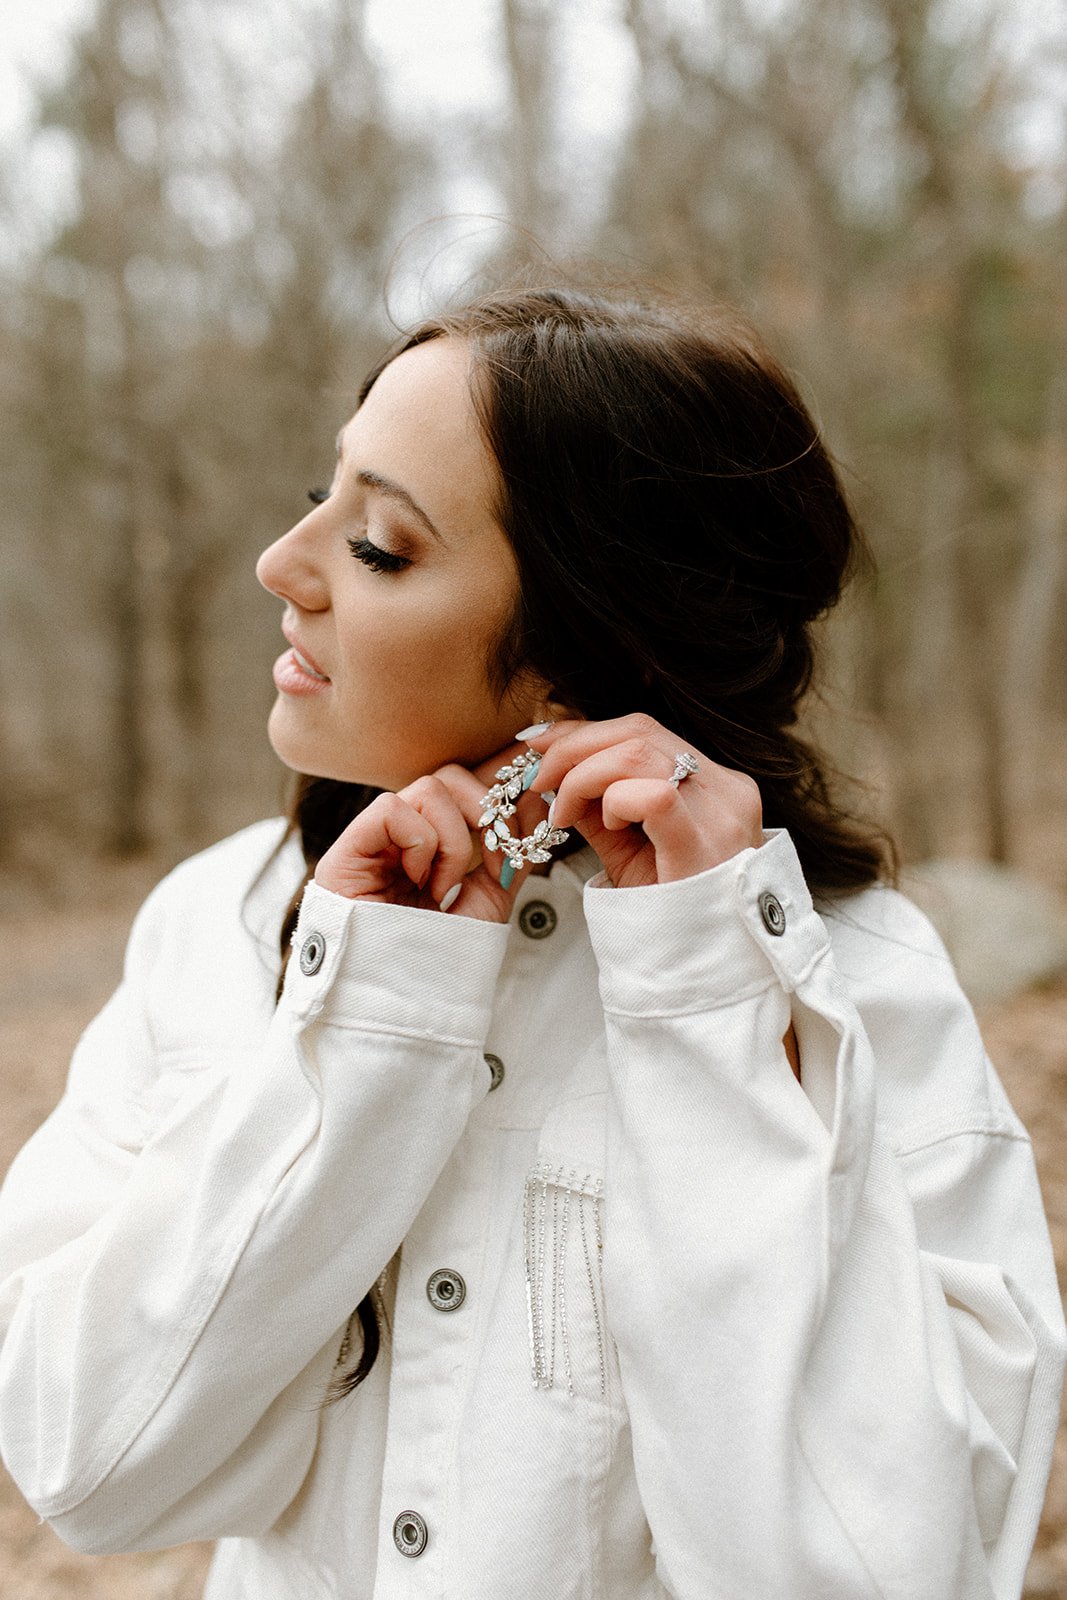 Bridal wedding jewelry and makeup inspiration for your adventure elopement